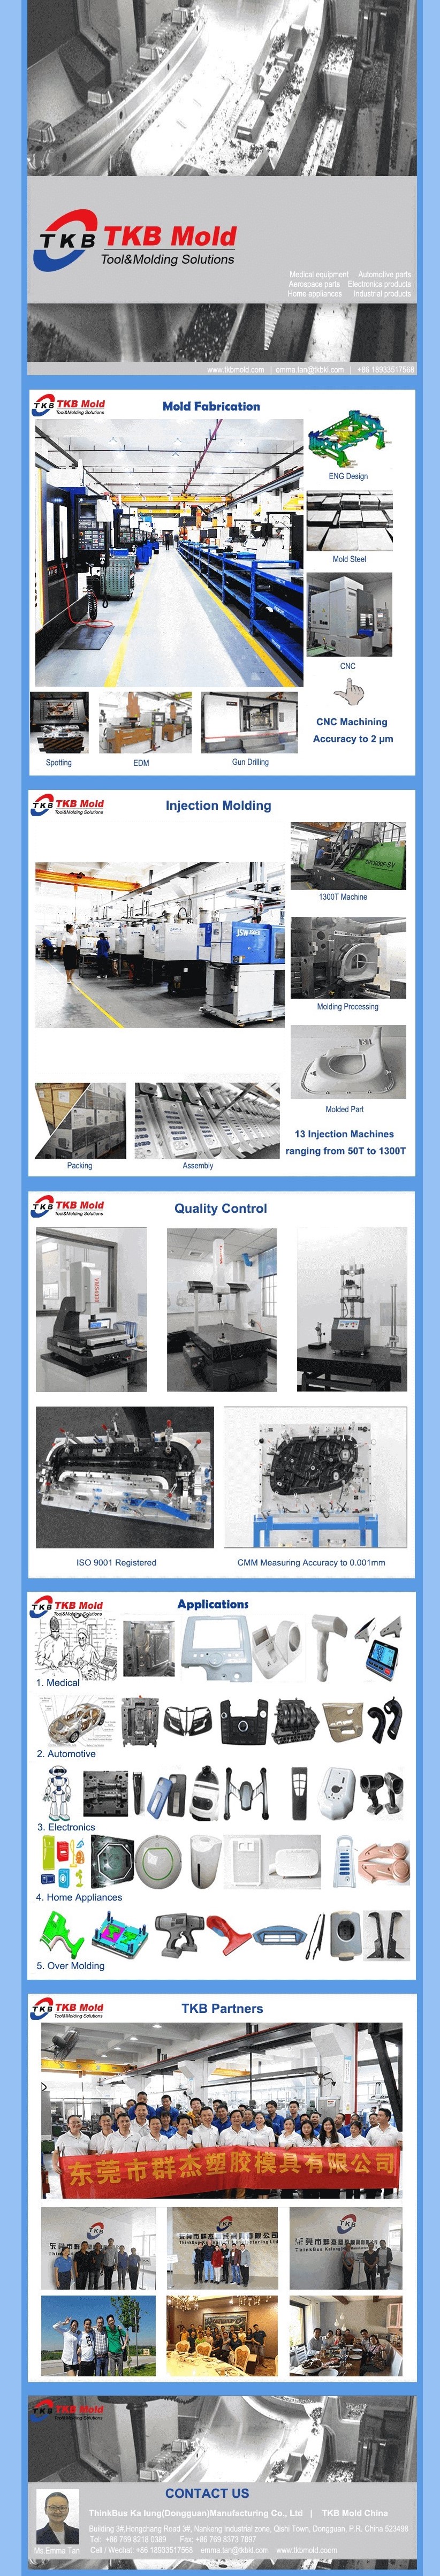 TKB Mold Factory Introduction